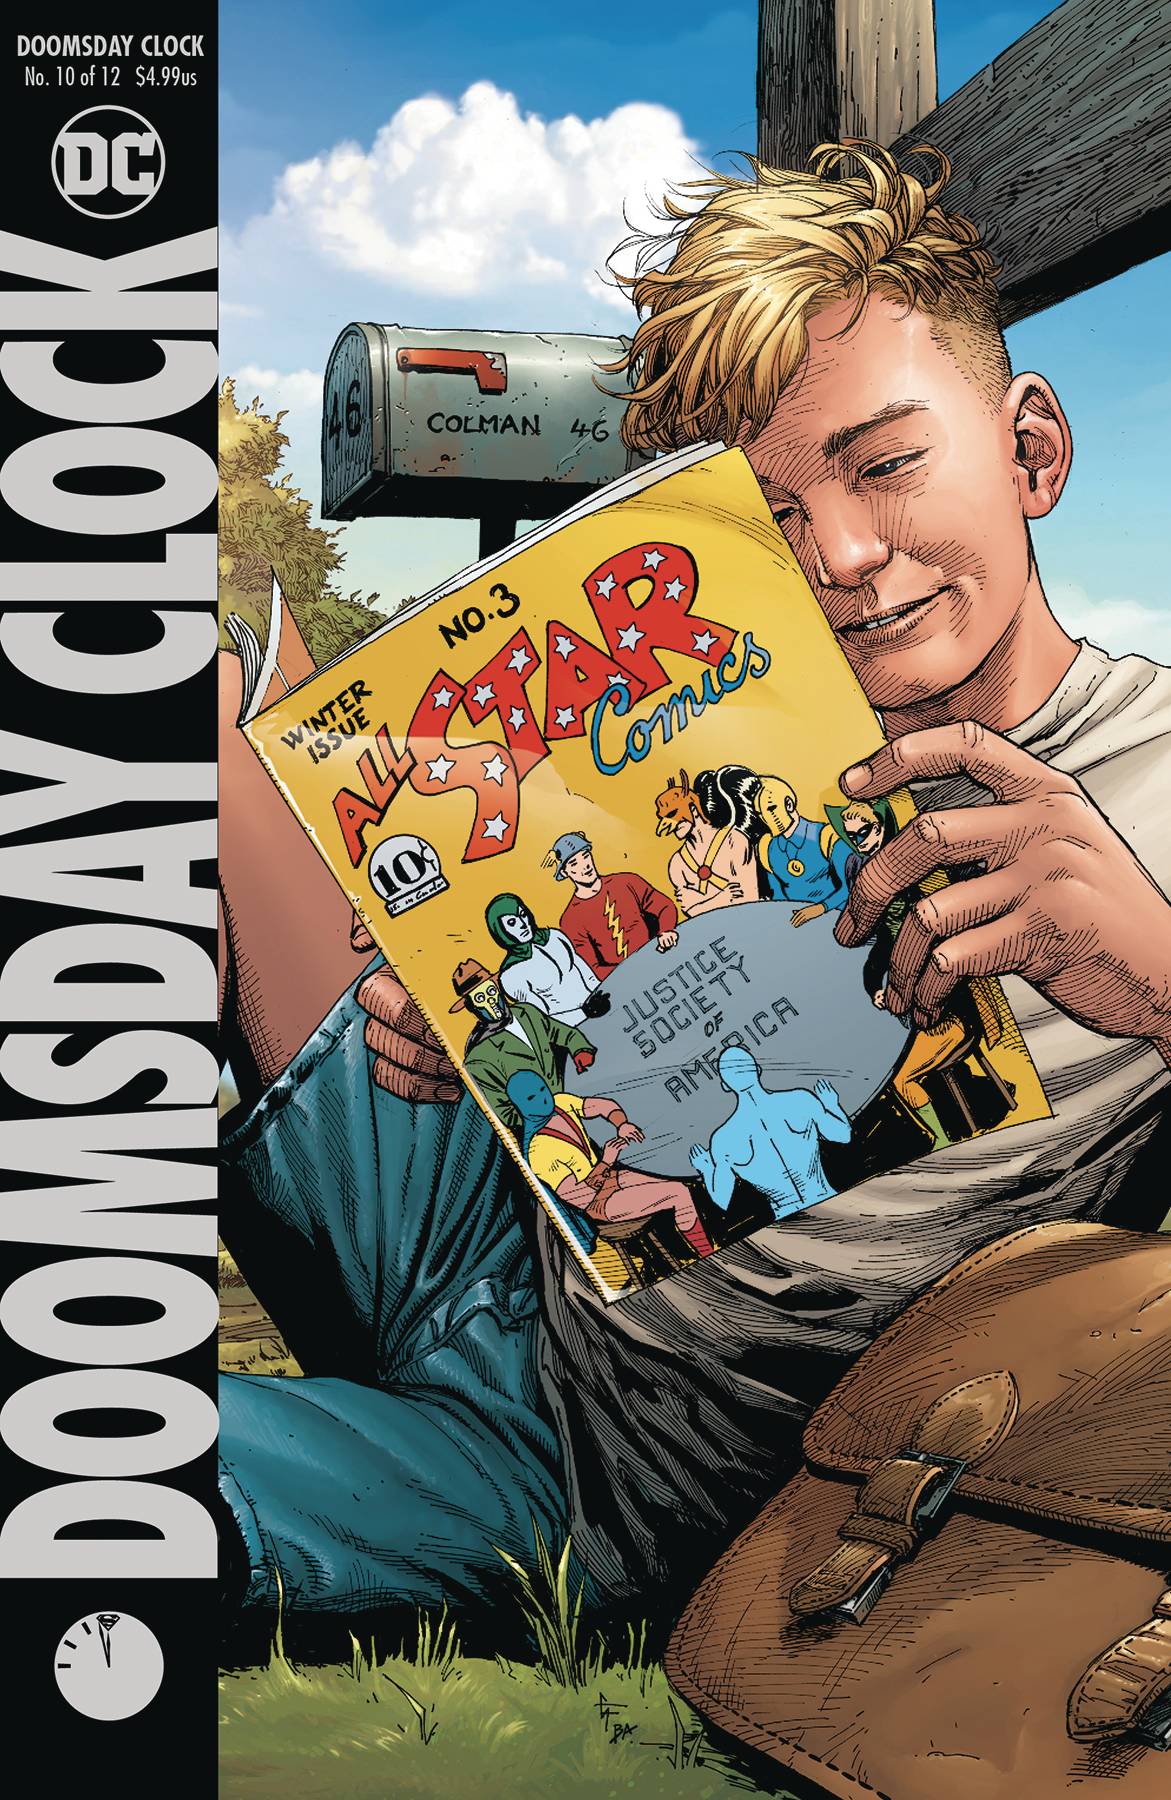 Doomsday Clock #10 Variant Edition (Of 12)